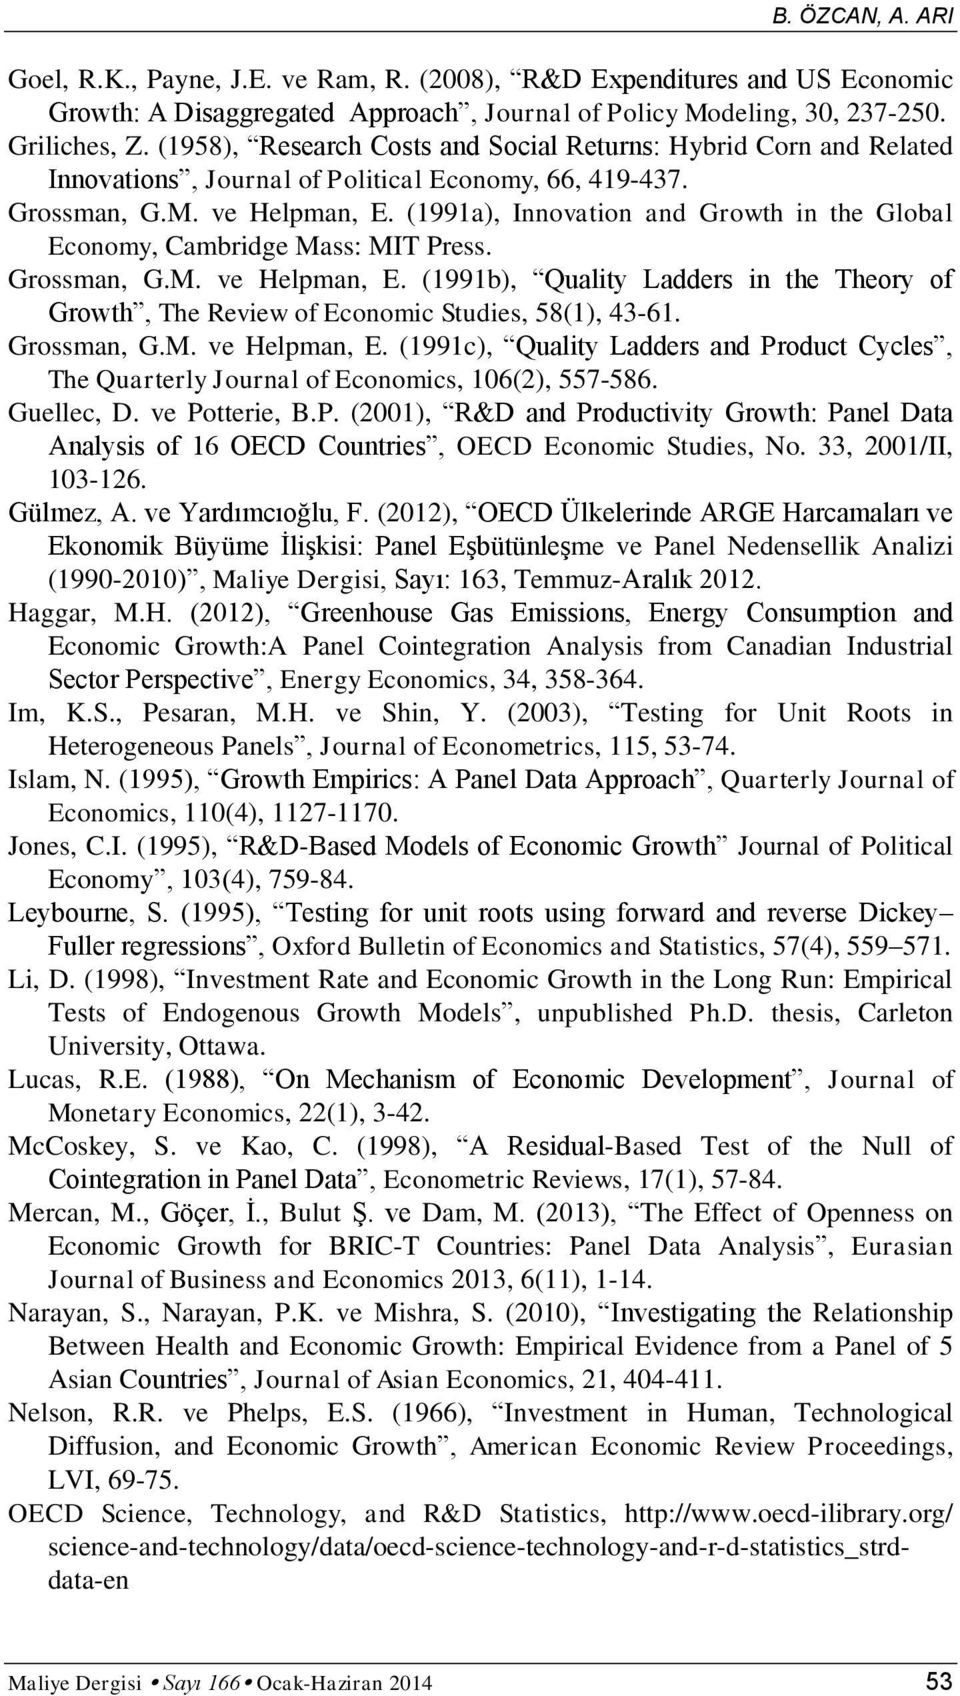 (1991a), Innovaton and Growth n the Global Economy, Cambrdge Mass: MIT Press. Grossman, G.M. ve Helpman, E. (1991b), Qualy Ladders n the Theory of Growth, The Revew of Economc Studes, 58(1), 43-61.